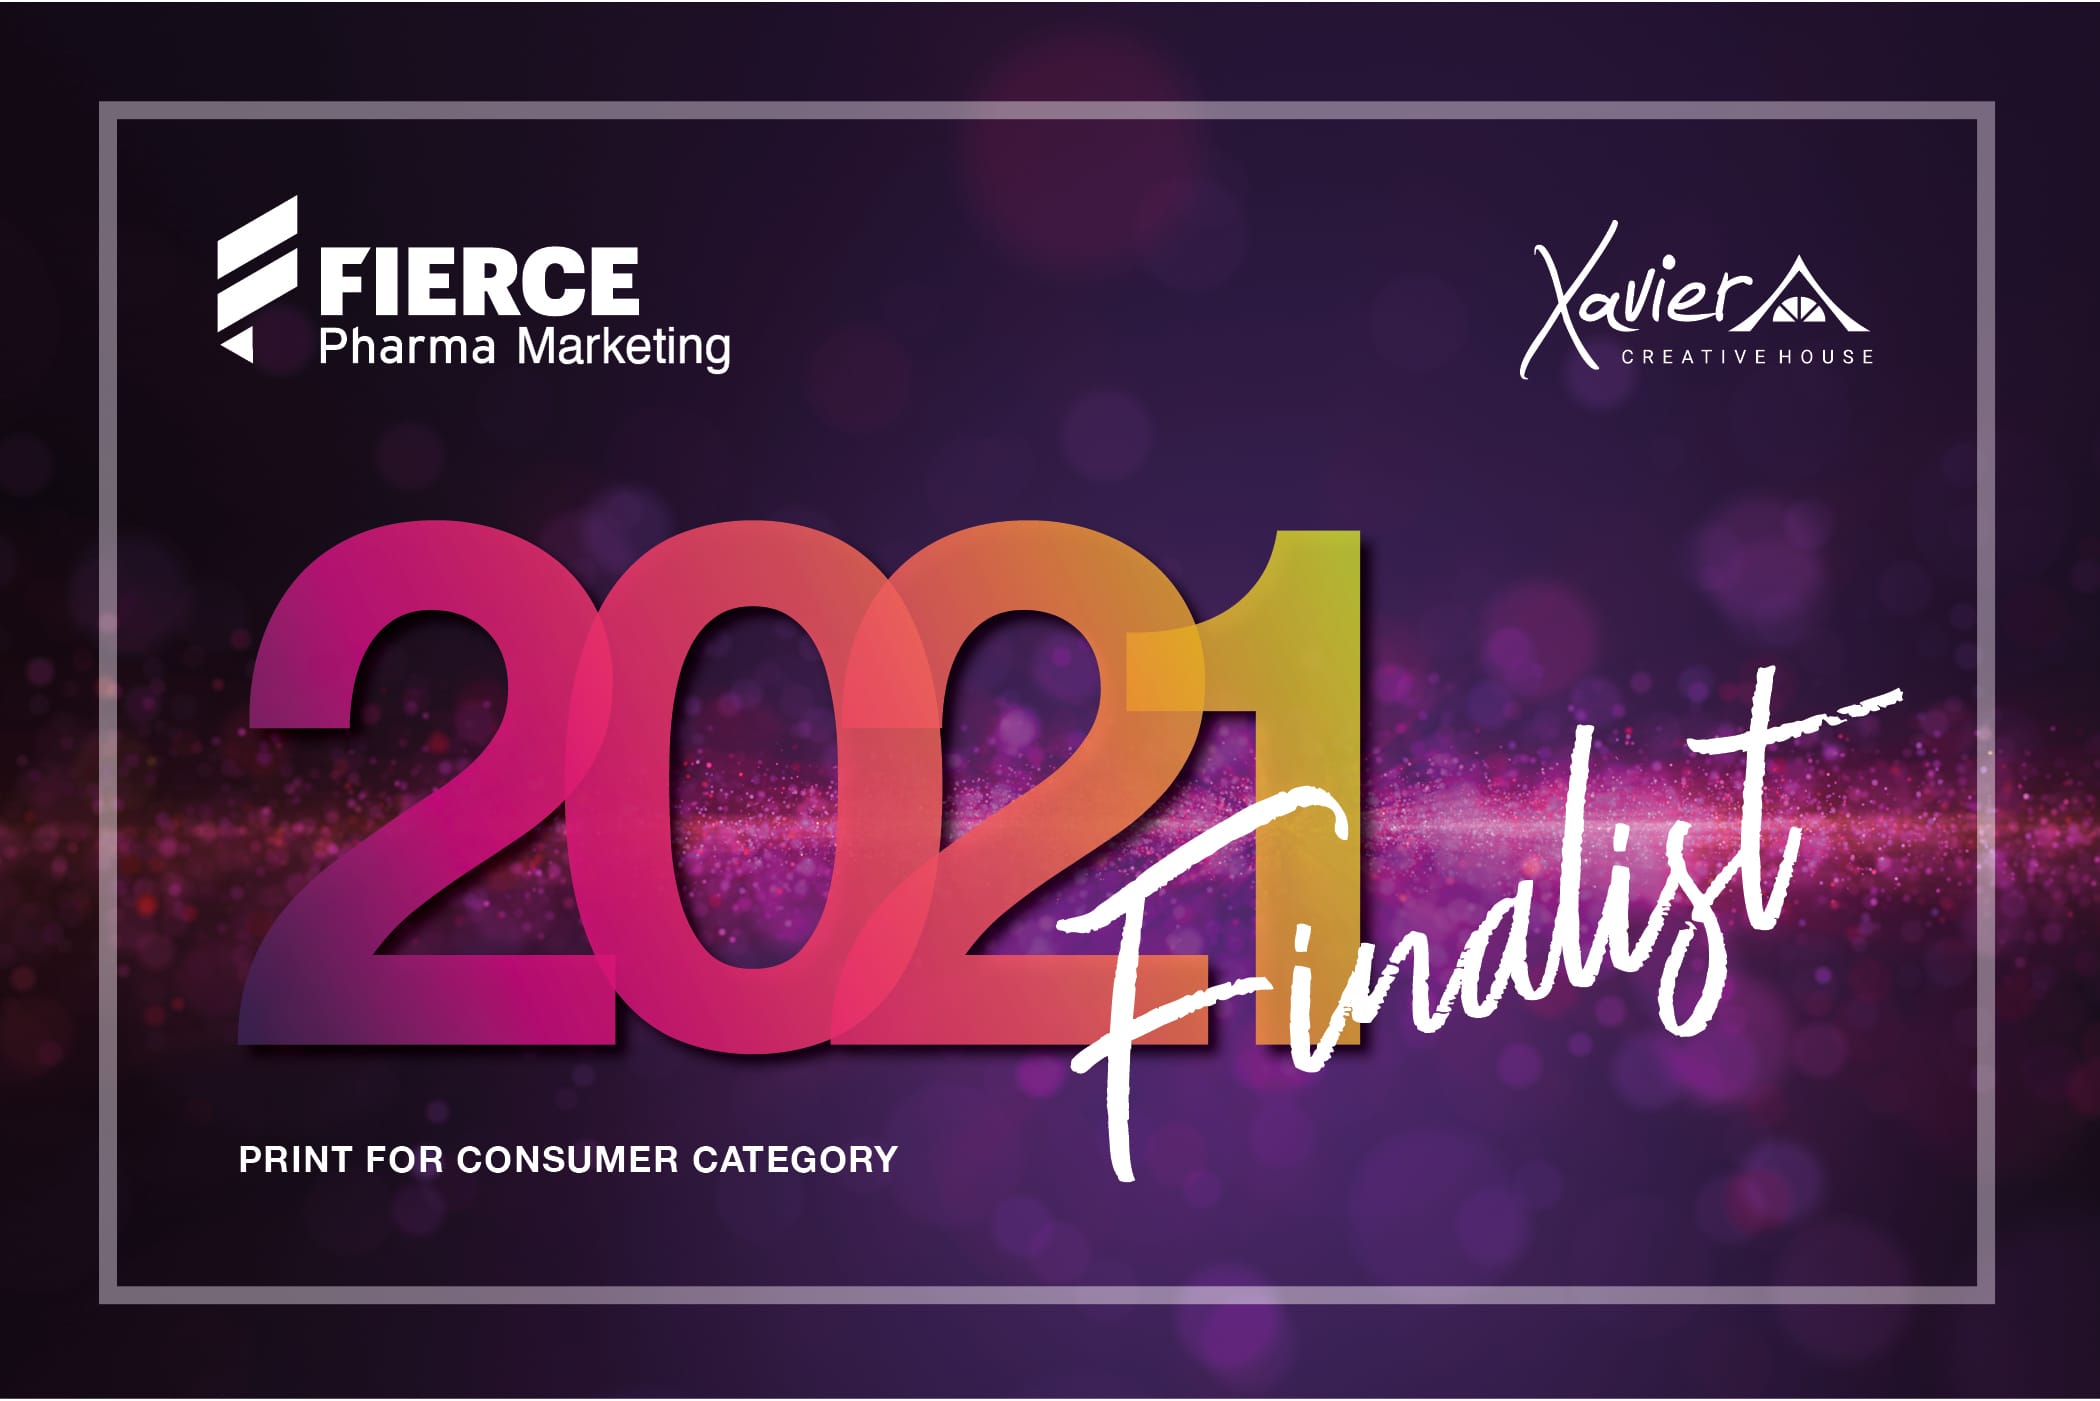 XAVIER CREATIVE HOUSE has been recognized as a Finalist in the Fierce Pharma  Marketing Awards 2021, in the Print for Consumer Category - Xavier Creative  House